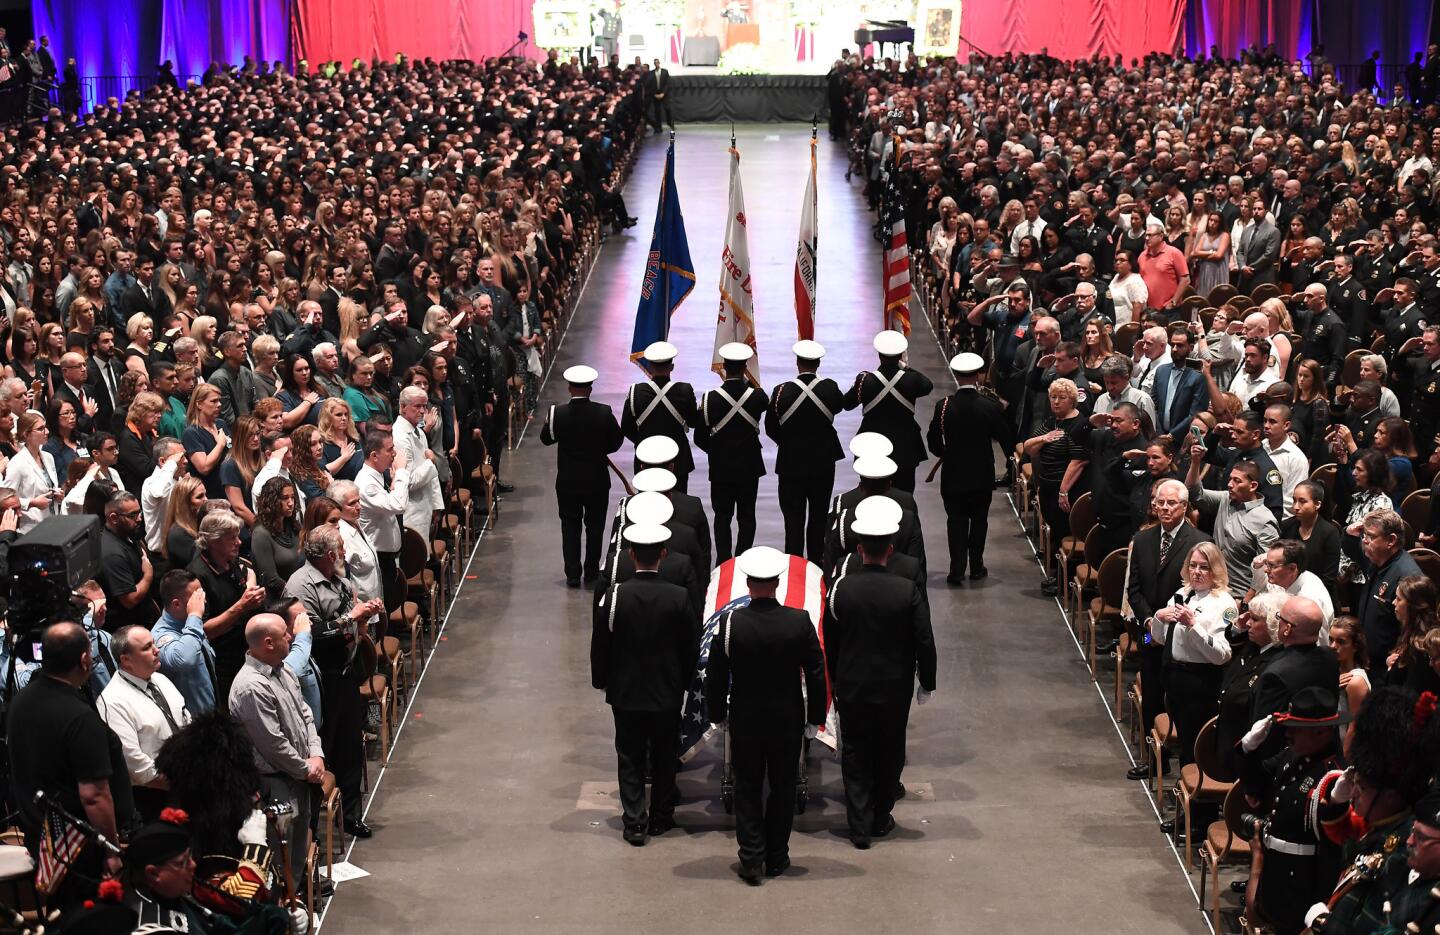 The casket of Lone Beach firefighter Capt. Dave Rosa enters the Long Beach Convention Center during his memorial service Tuesday.